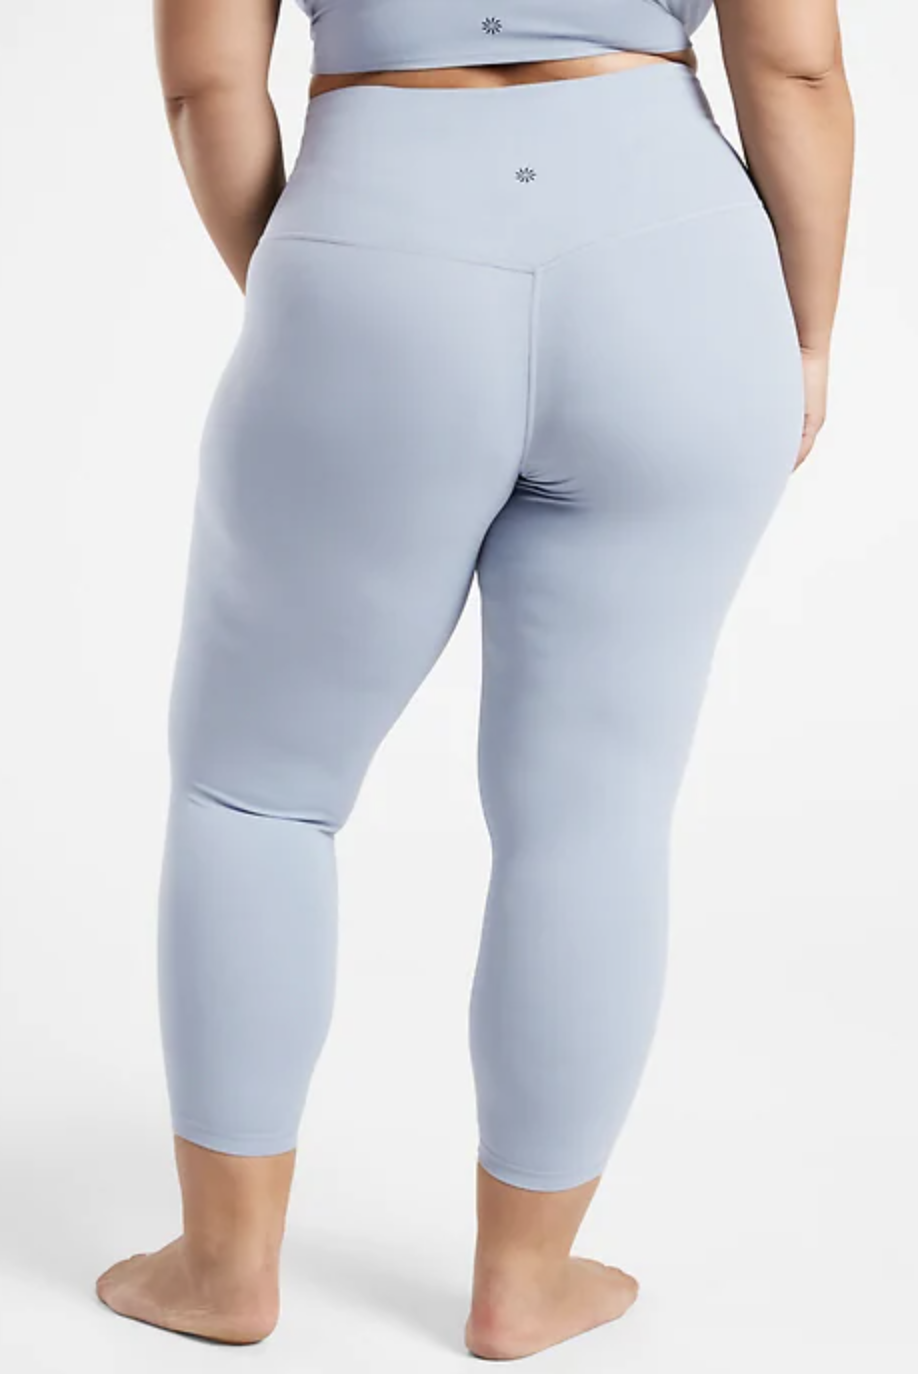 Comment leggings to receive a link in your messages along with sizing  details! Love the Lululemon align leggings but not the price tag?